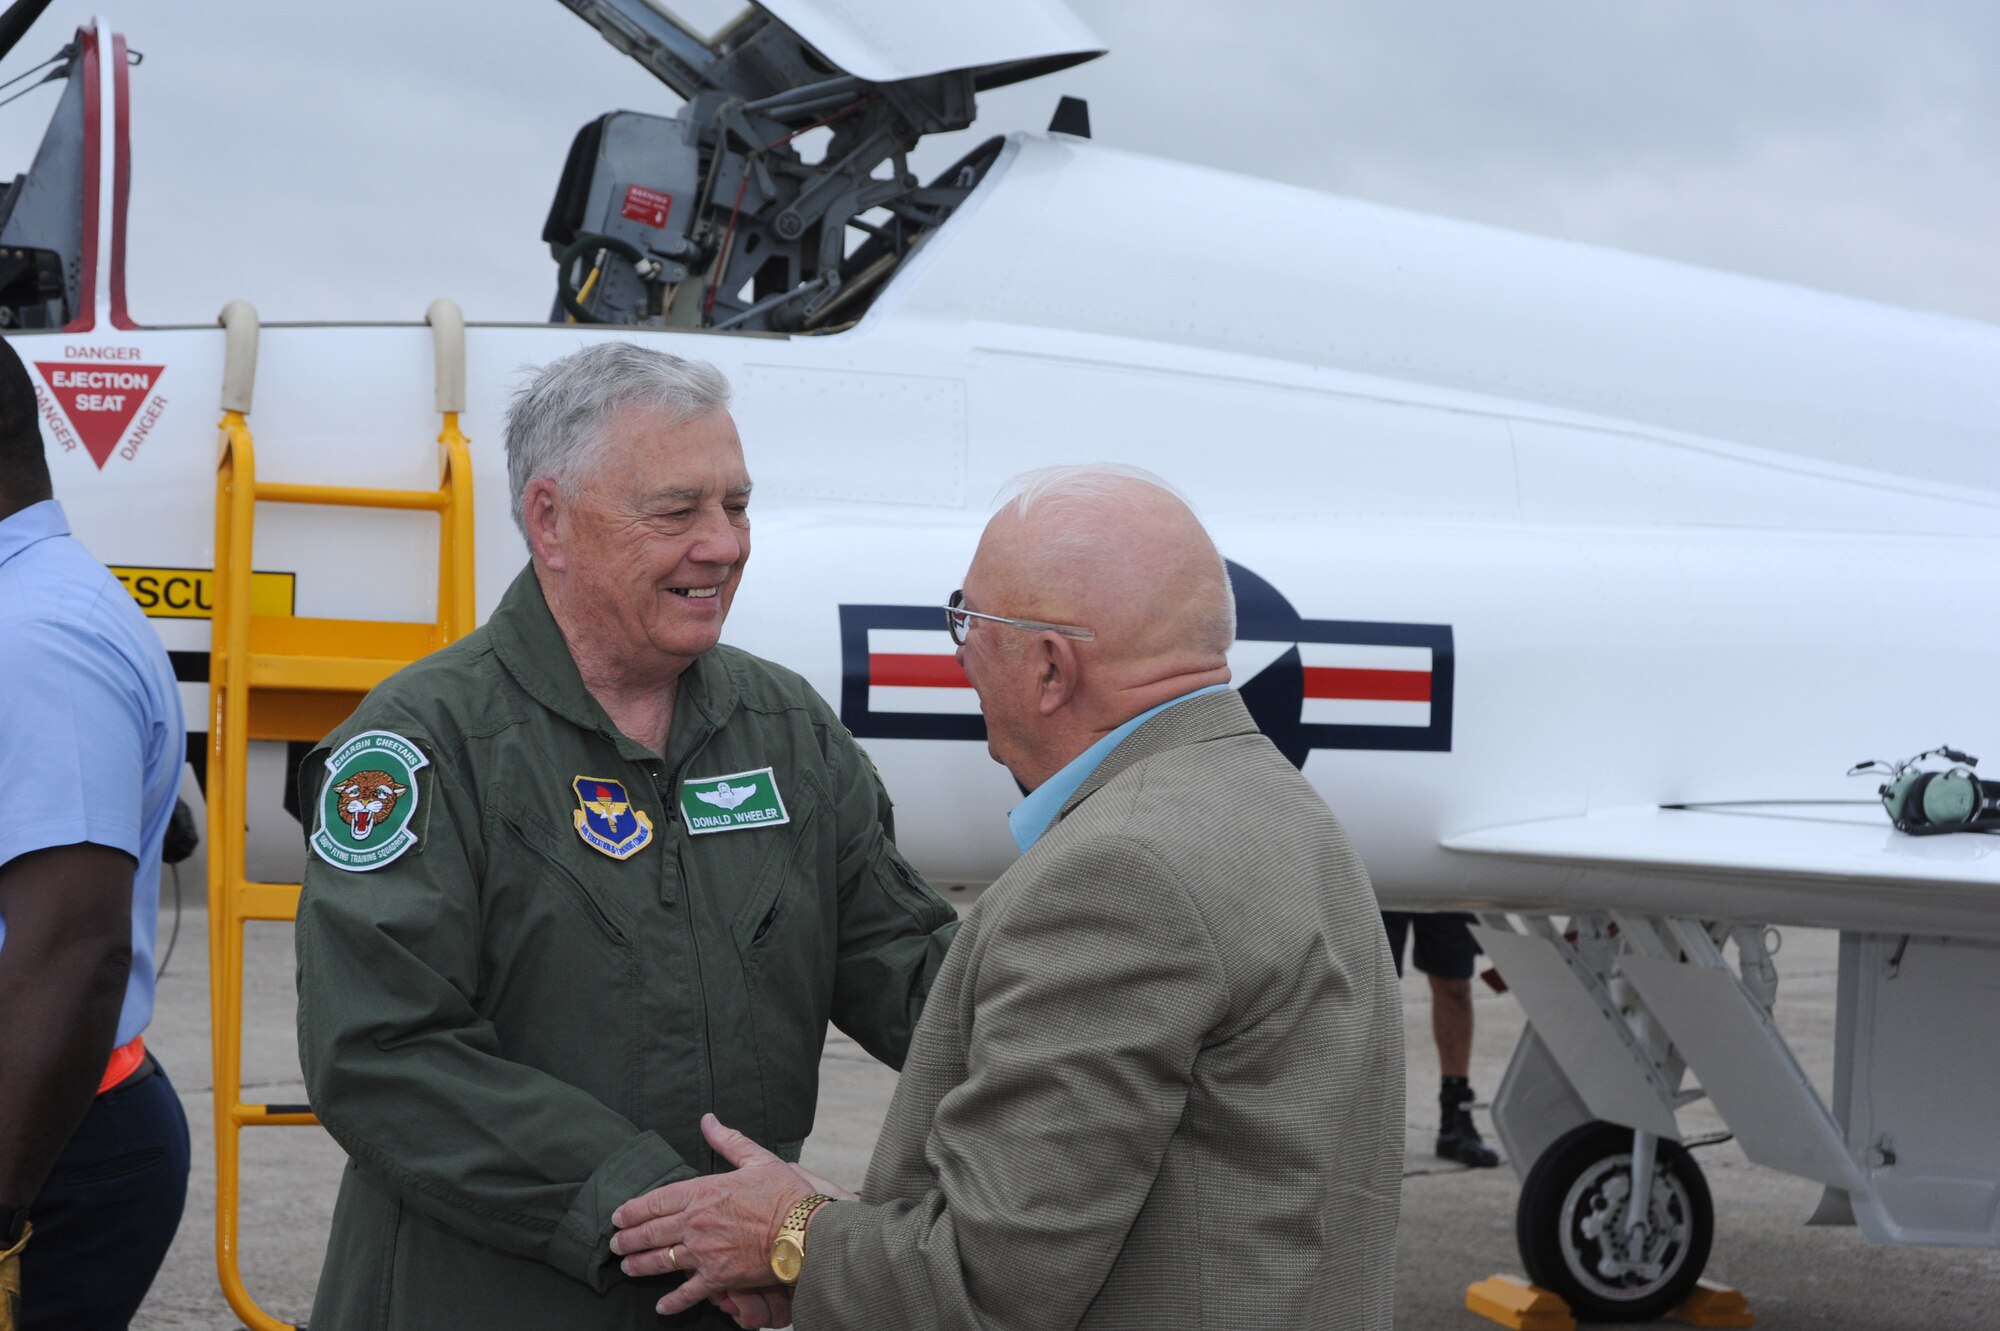 Retired Lt. Col. Donald Wheeler (left), a member of the first class to train in the T-38, reunites with retired Col. James Gibler, who was Colonel Wheeler's T-38 instructor in 1962, during a ceremony Thursday commemorating the 50th anniversary of the arrival of the T-38 at Randolph.  The two had not seen each other in 49 years.    (U.S. Air Force photo/Rich McFadden)